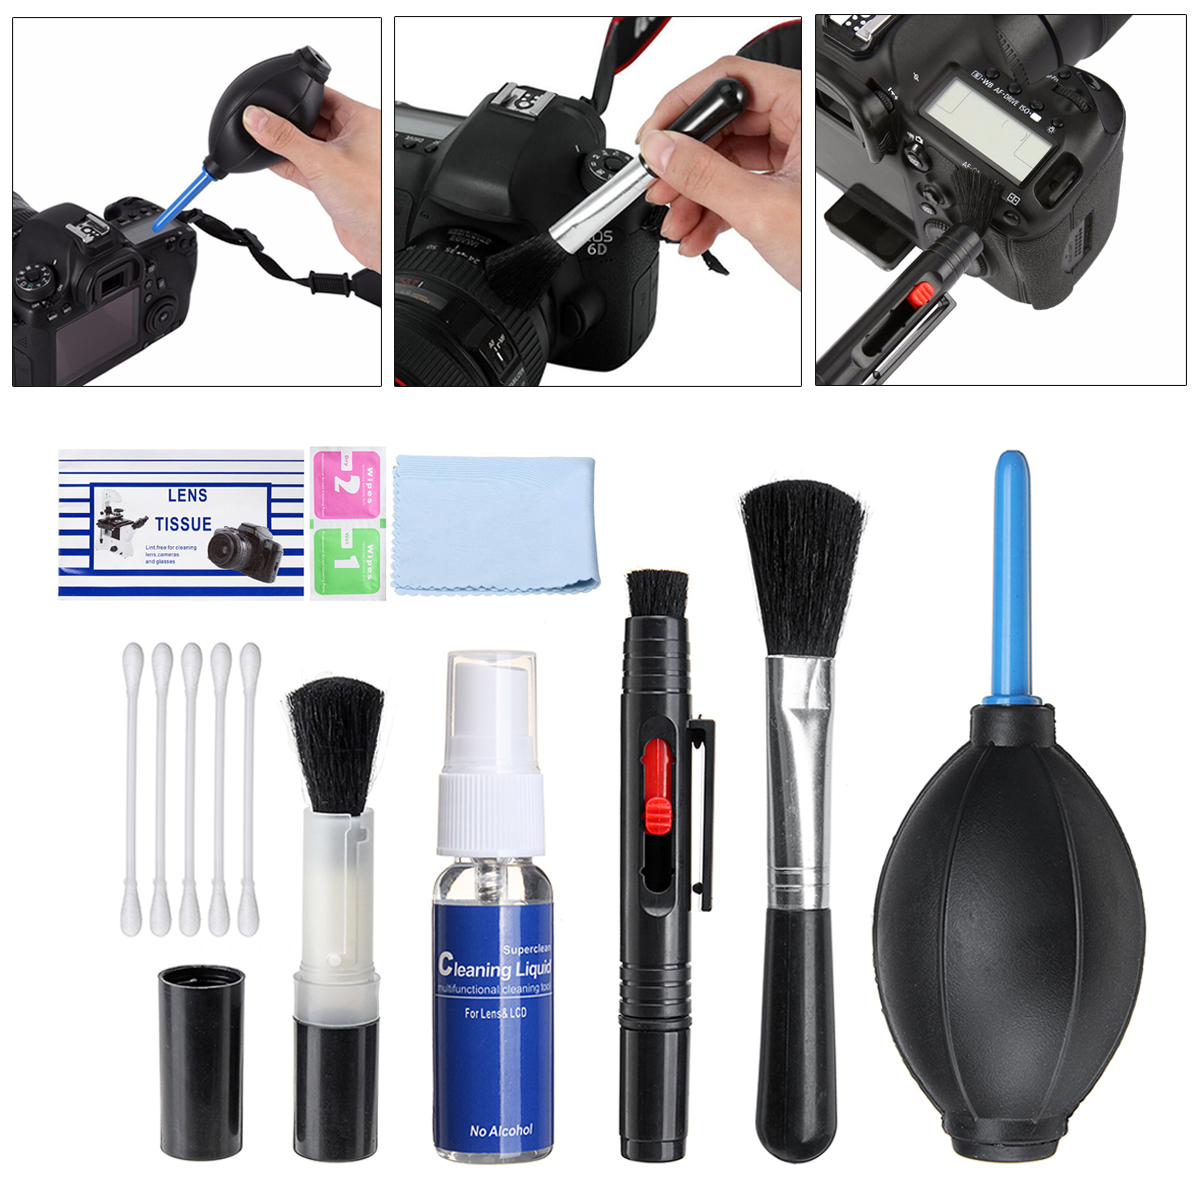 Cleaning Kit Professional Cleaning Brush For Camera Computer Smartphone Tools 15